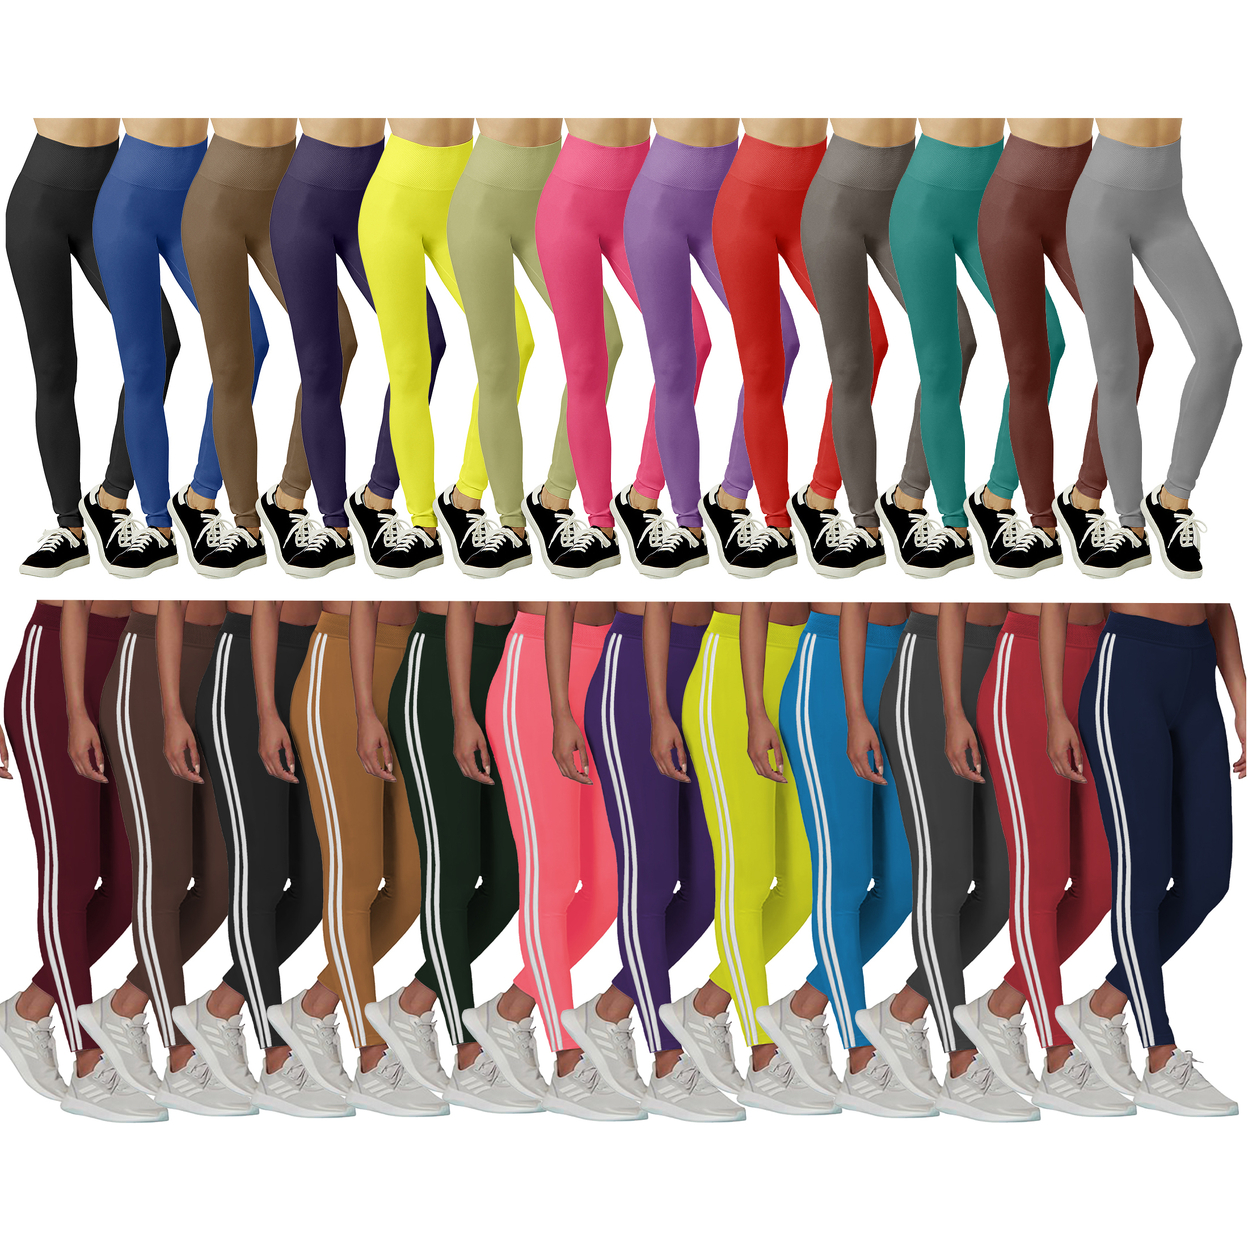 5-Pack: Women's Ultra-Soft Smooth High Waisted Fleece Lined Winter Warm Cozy Leggings - Solid, Small/medium